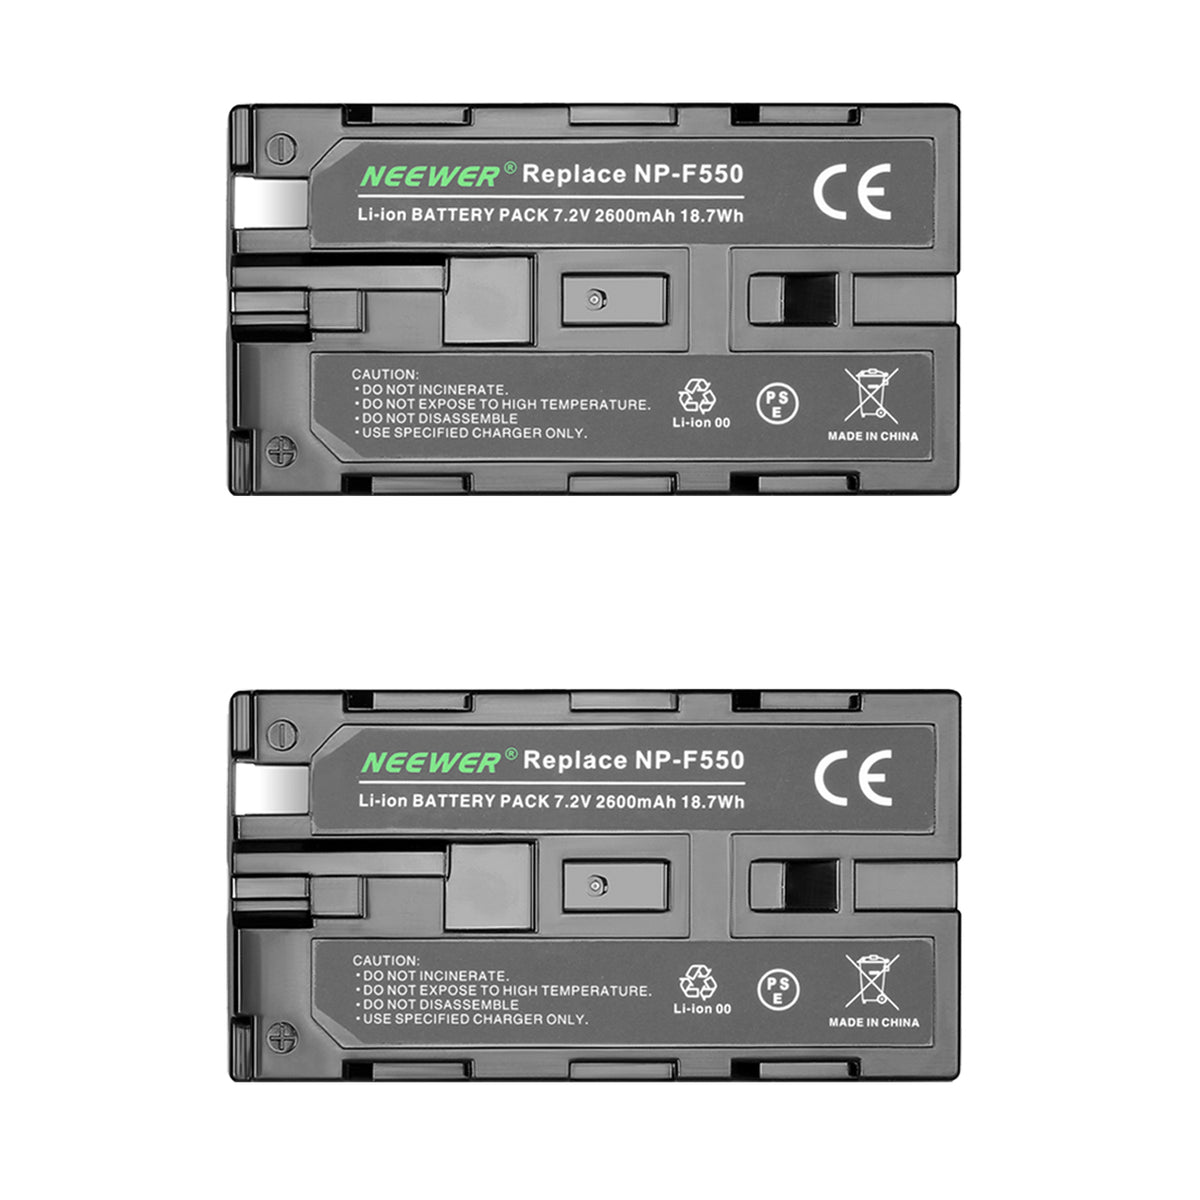 Neewer 2 Pack 2600mah Sony Np F550 570 530 Replacement Battery Neewer